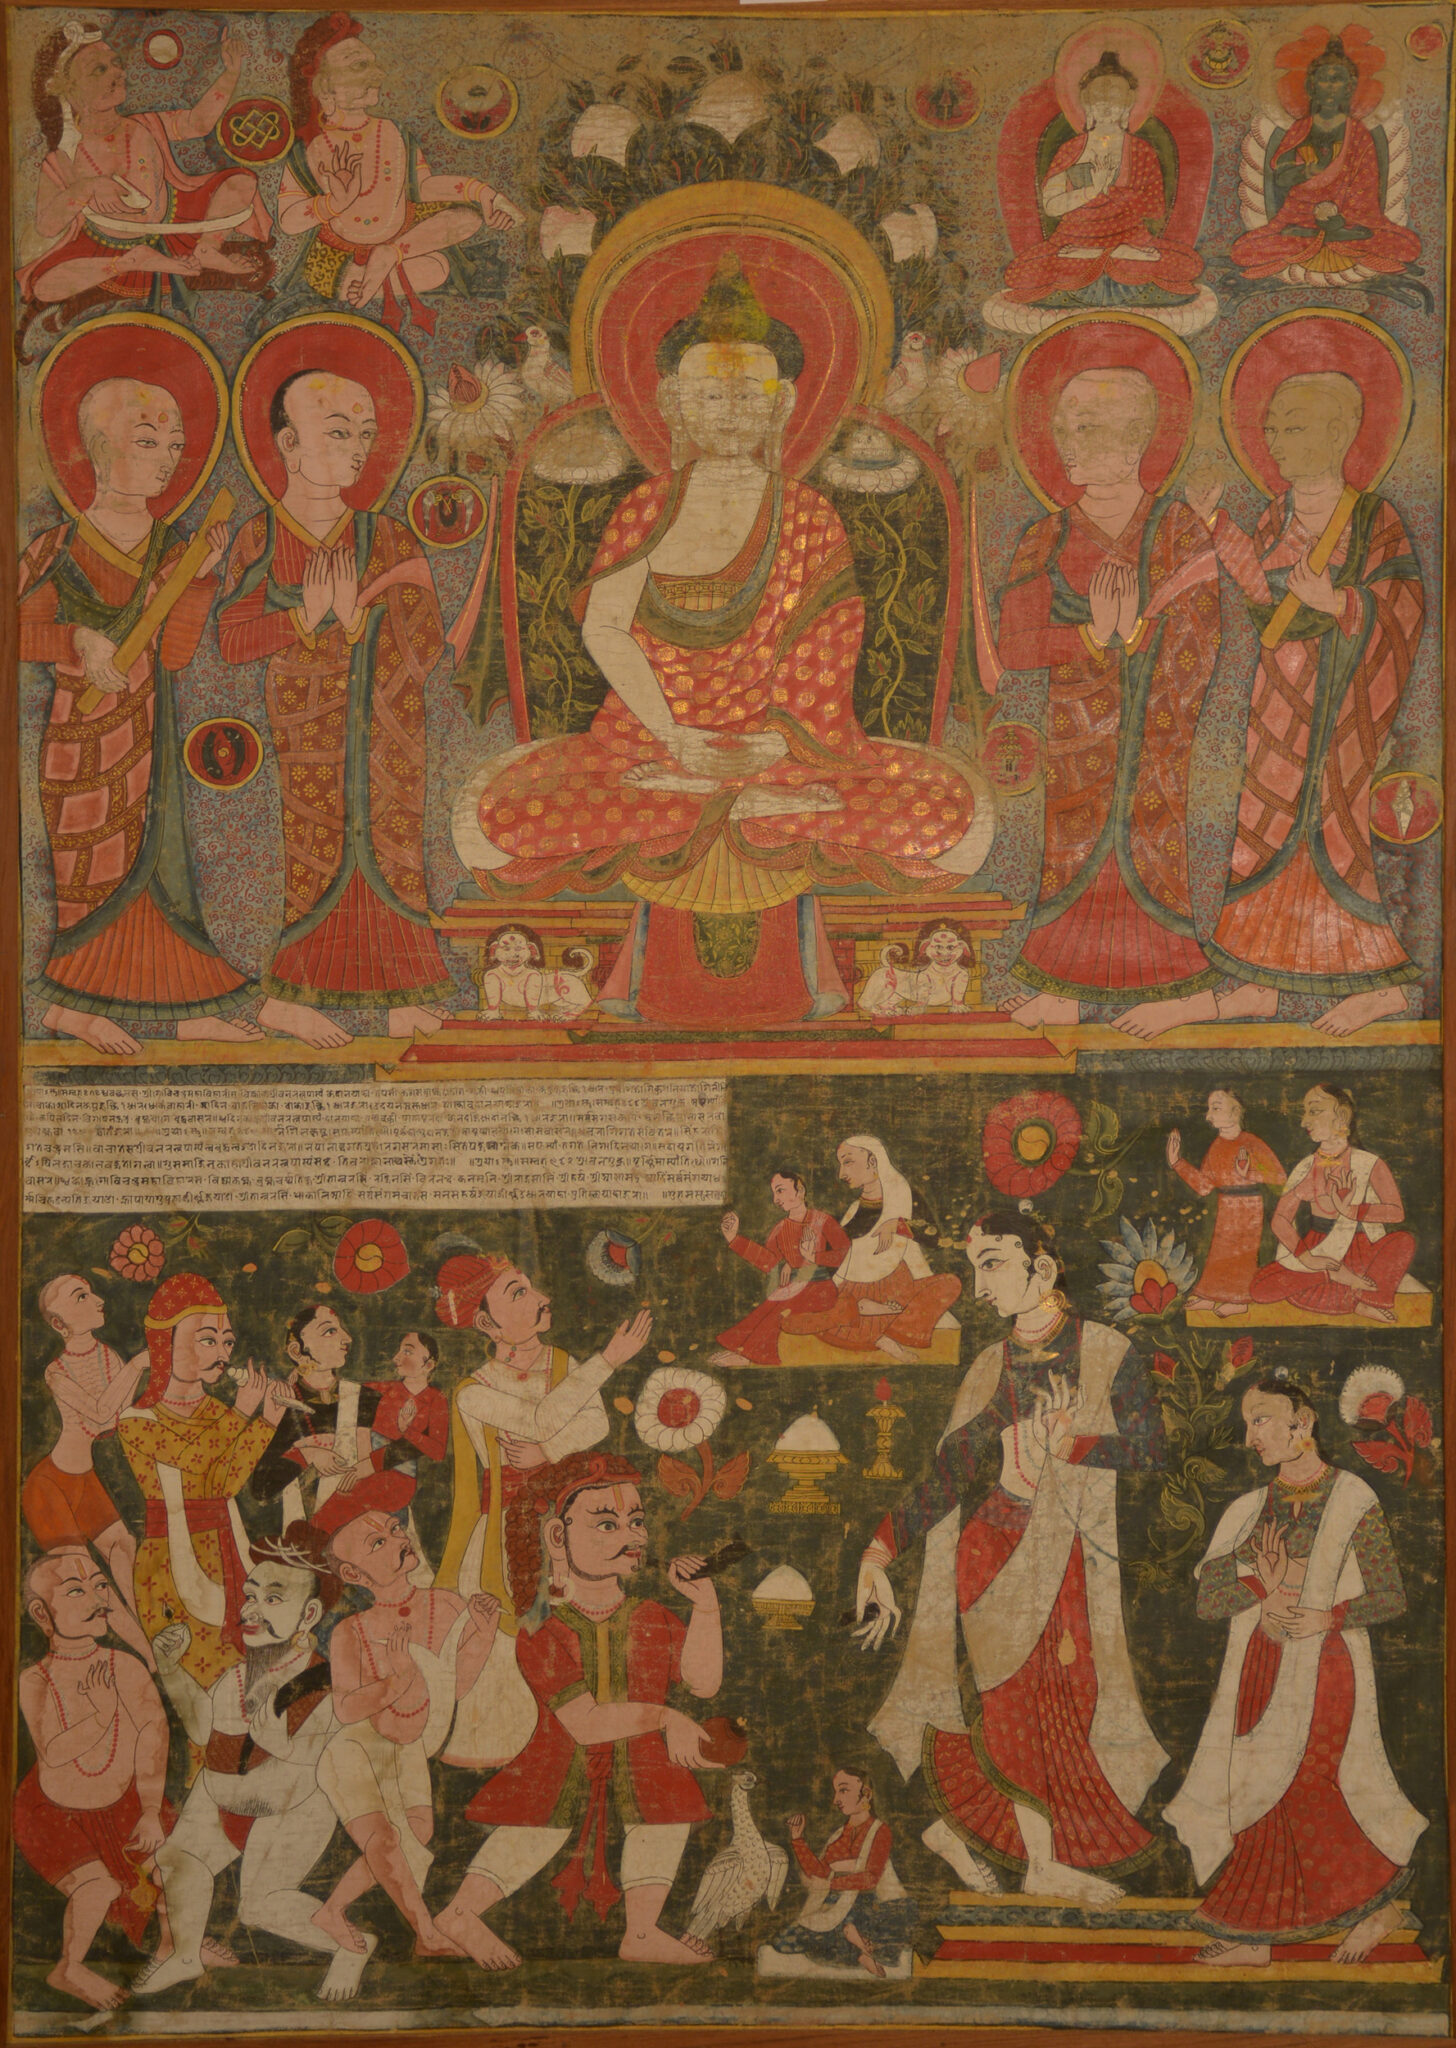 Two scenes: at top, Buddha flanked by attendants; at bottom, figures in dynamic poses with text at top left